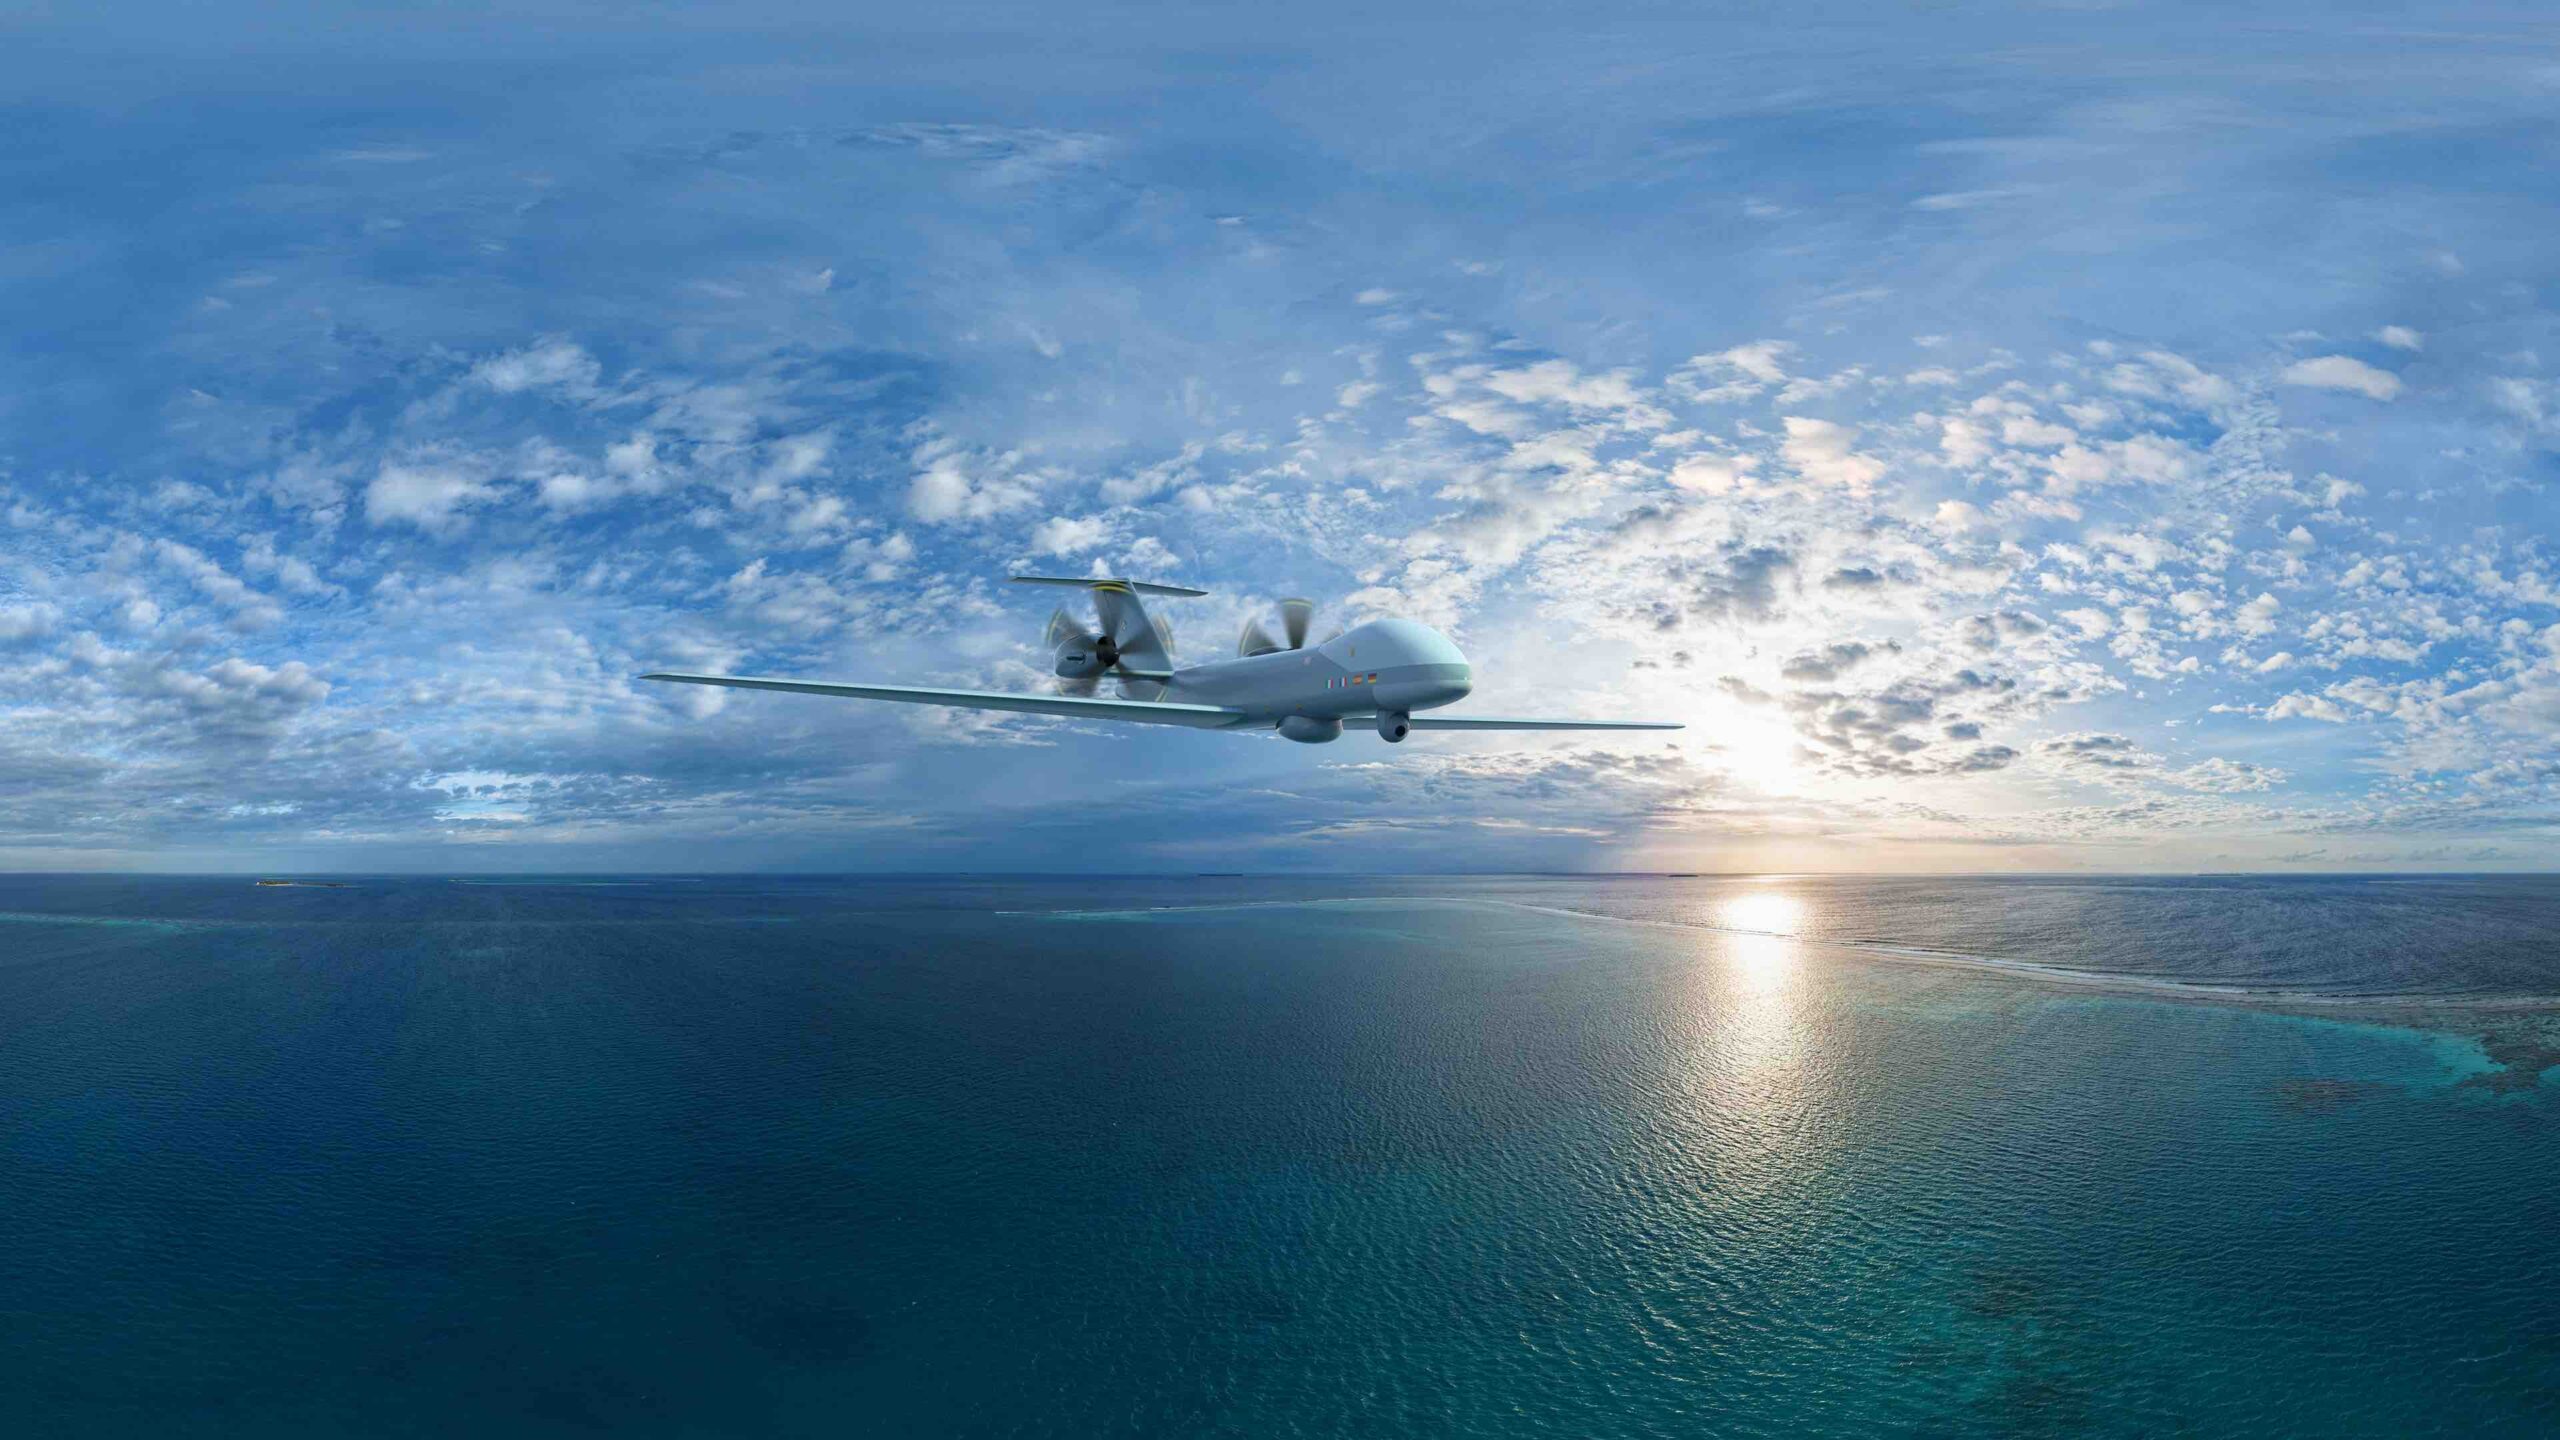 Airbus Achieves Key Milestone in Eurodrone Program with Successful Preliminary Design Review